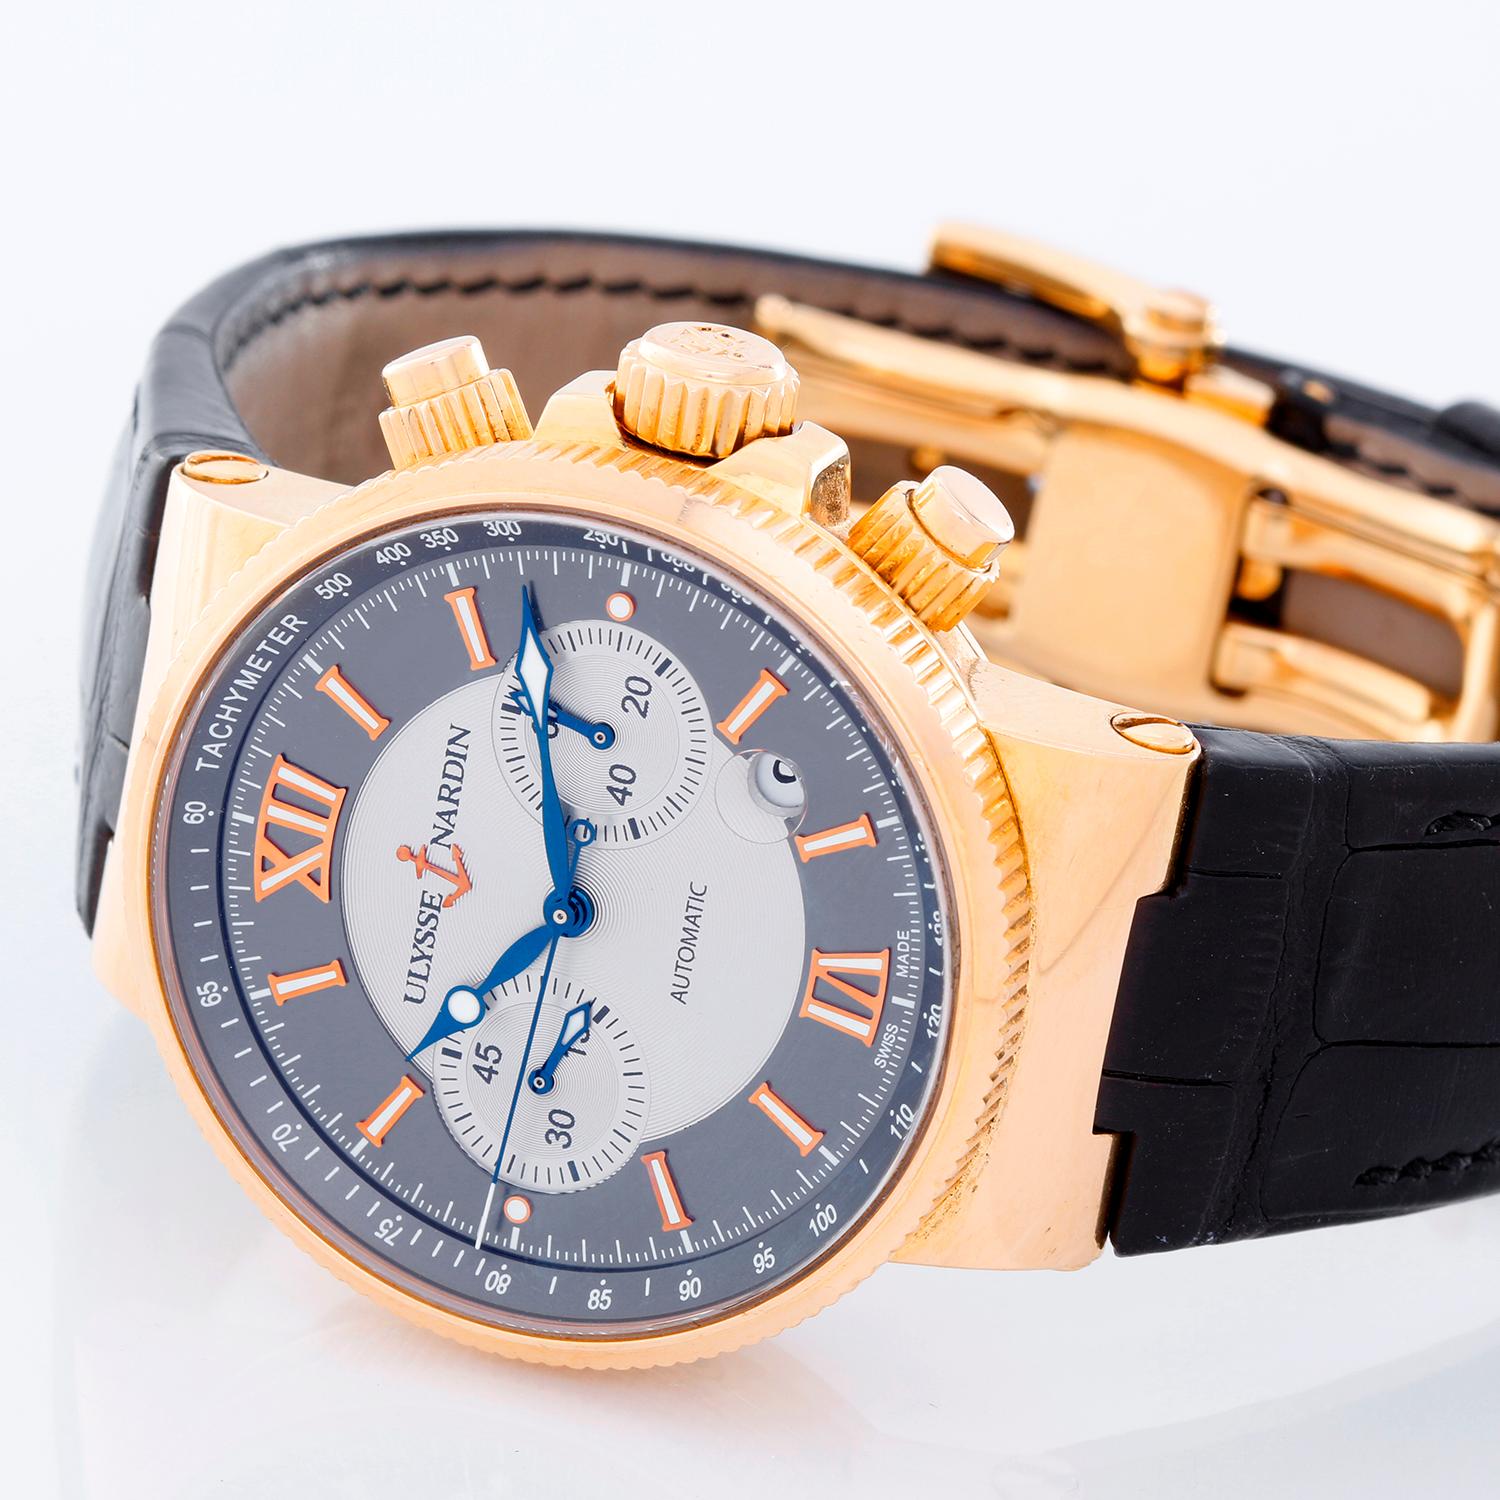 Ulysse Nardin Maxi Marine Chronograph Mens Watches - Automatic winding. 18K Rose gold  ( 41 mm ) . Two-toned dial in silver and slate gray with Roman numeral index hour markers . Black Ulysse Nardin with 18K rose gold deployant clasp . Pre-owned